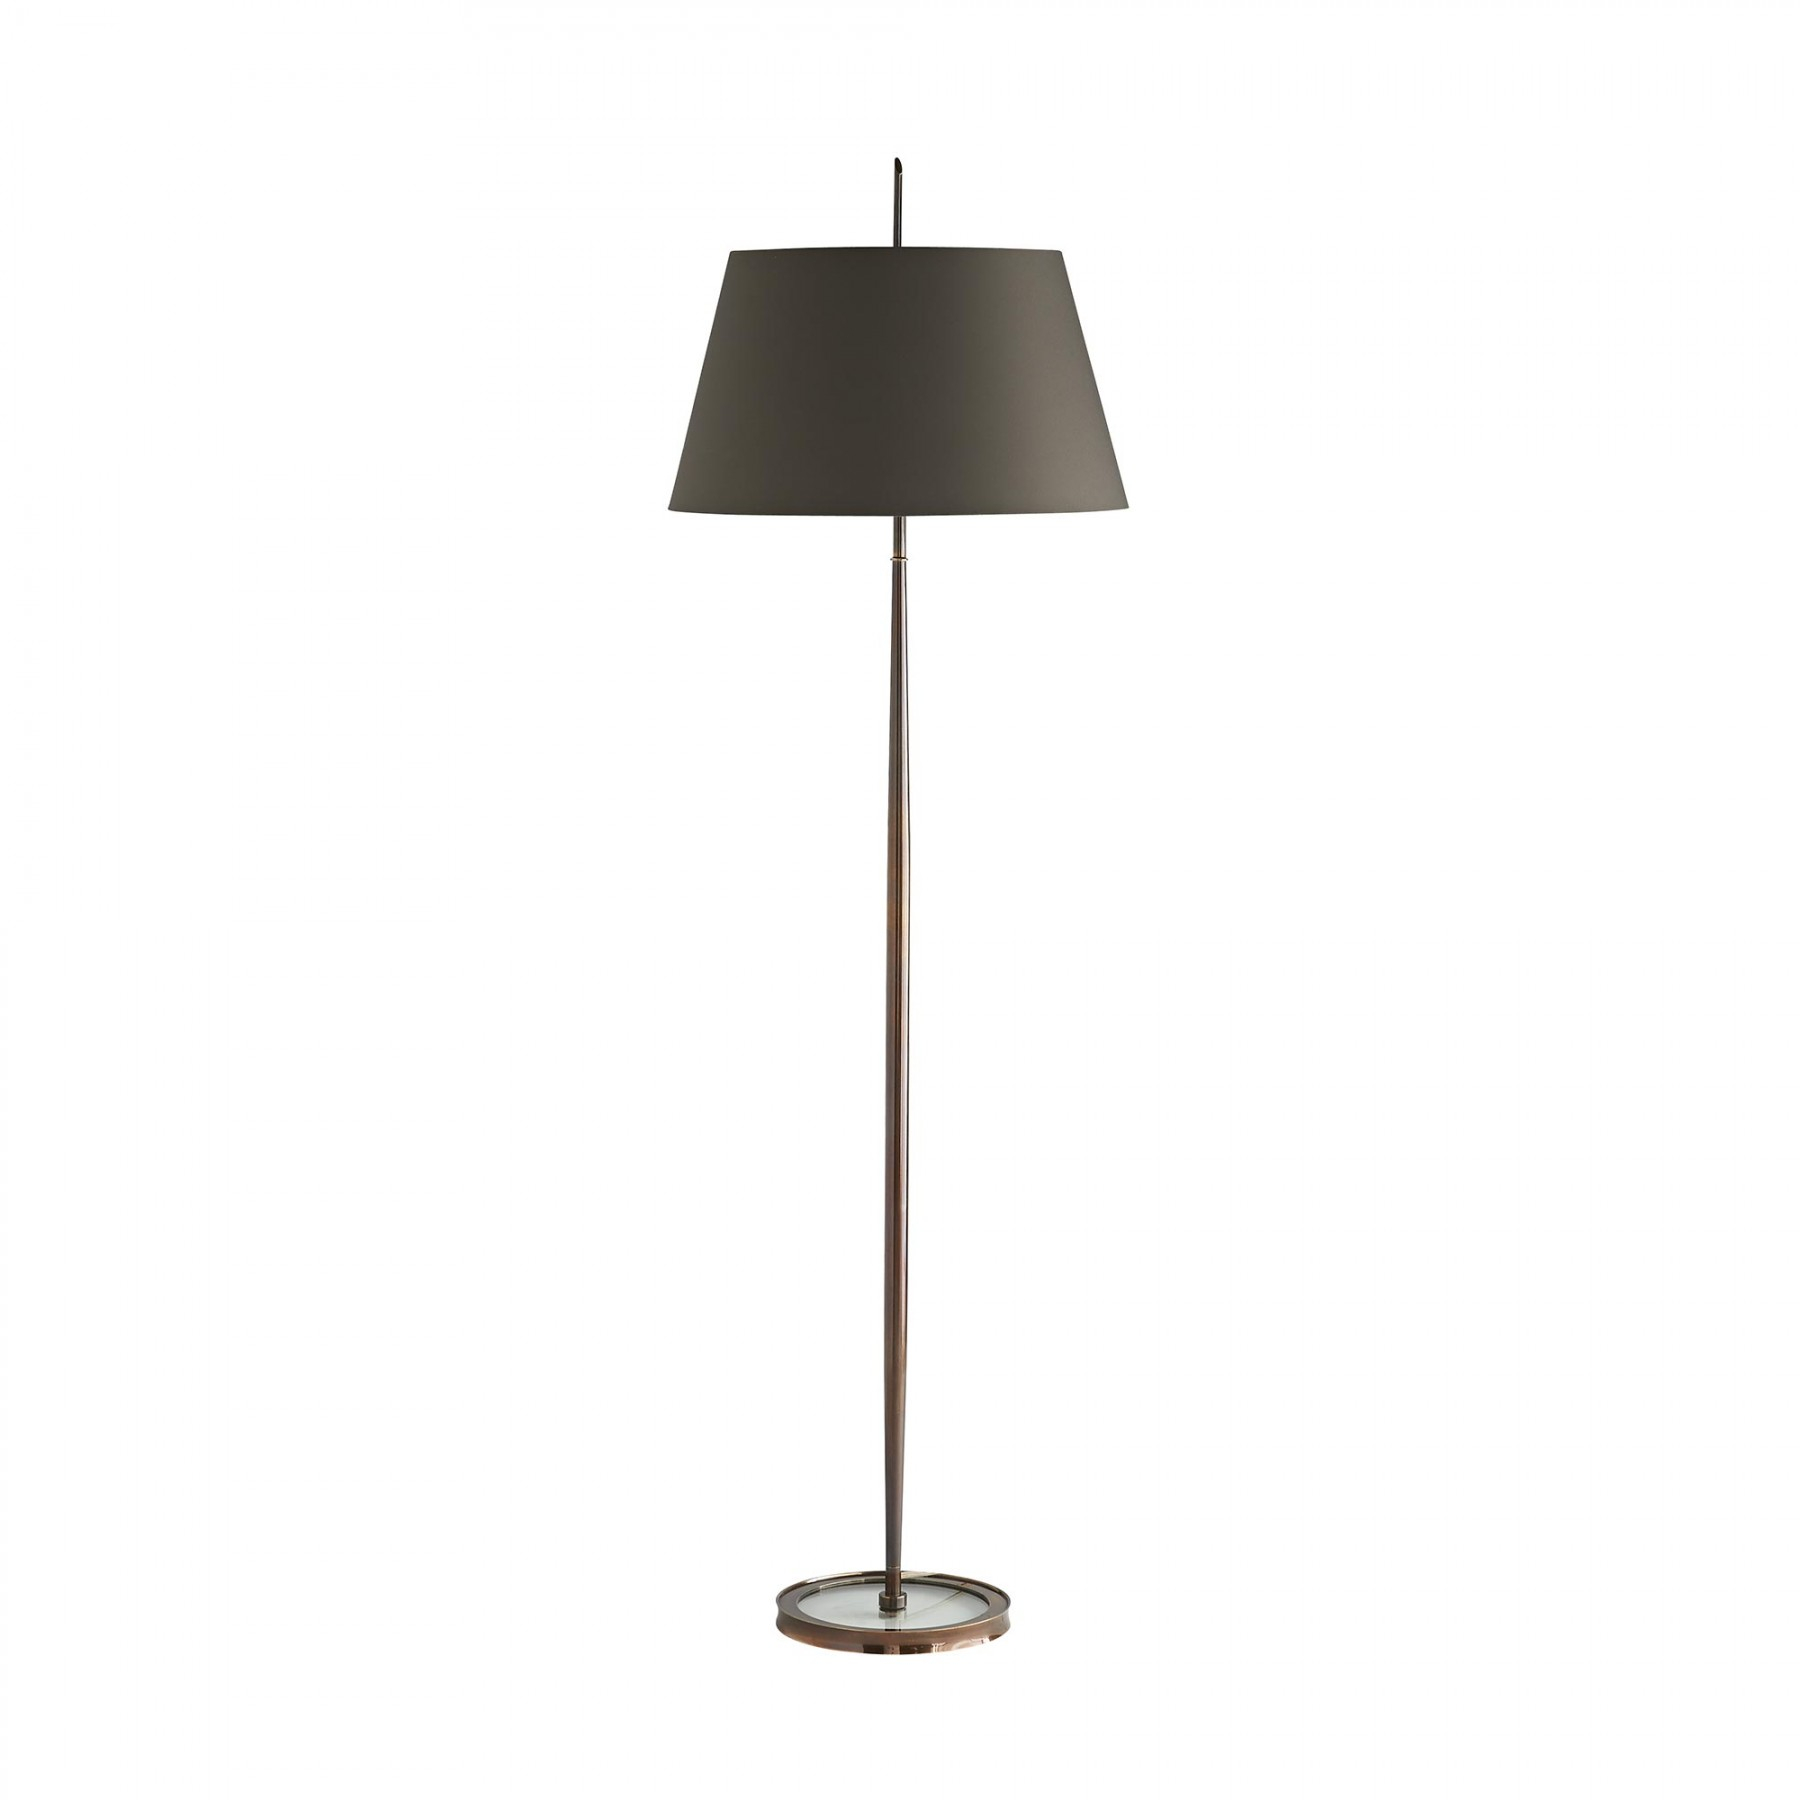 Malin Floor Lamp intended for proportions 1800 X 1800